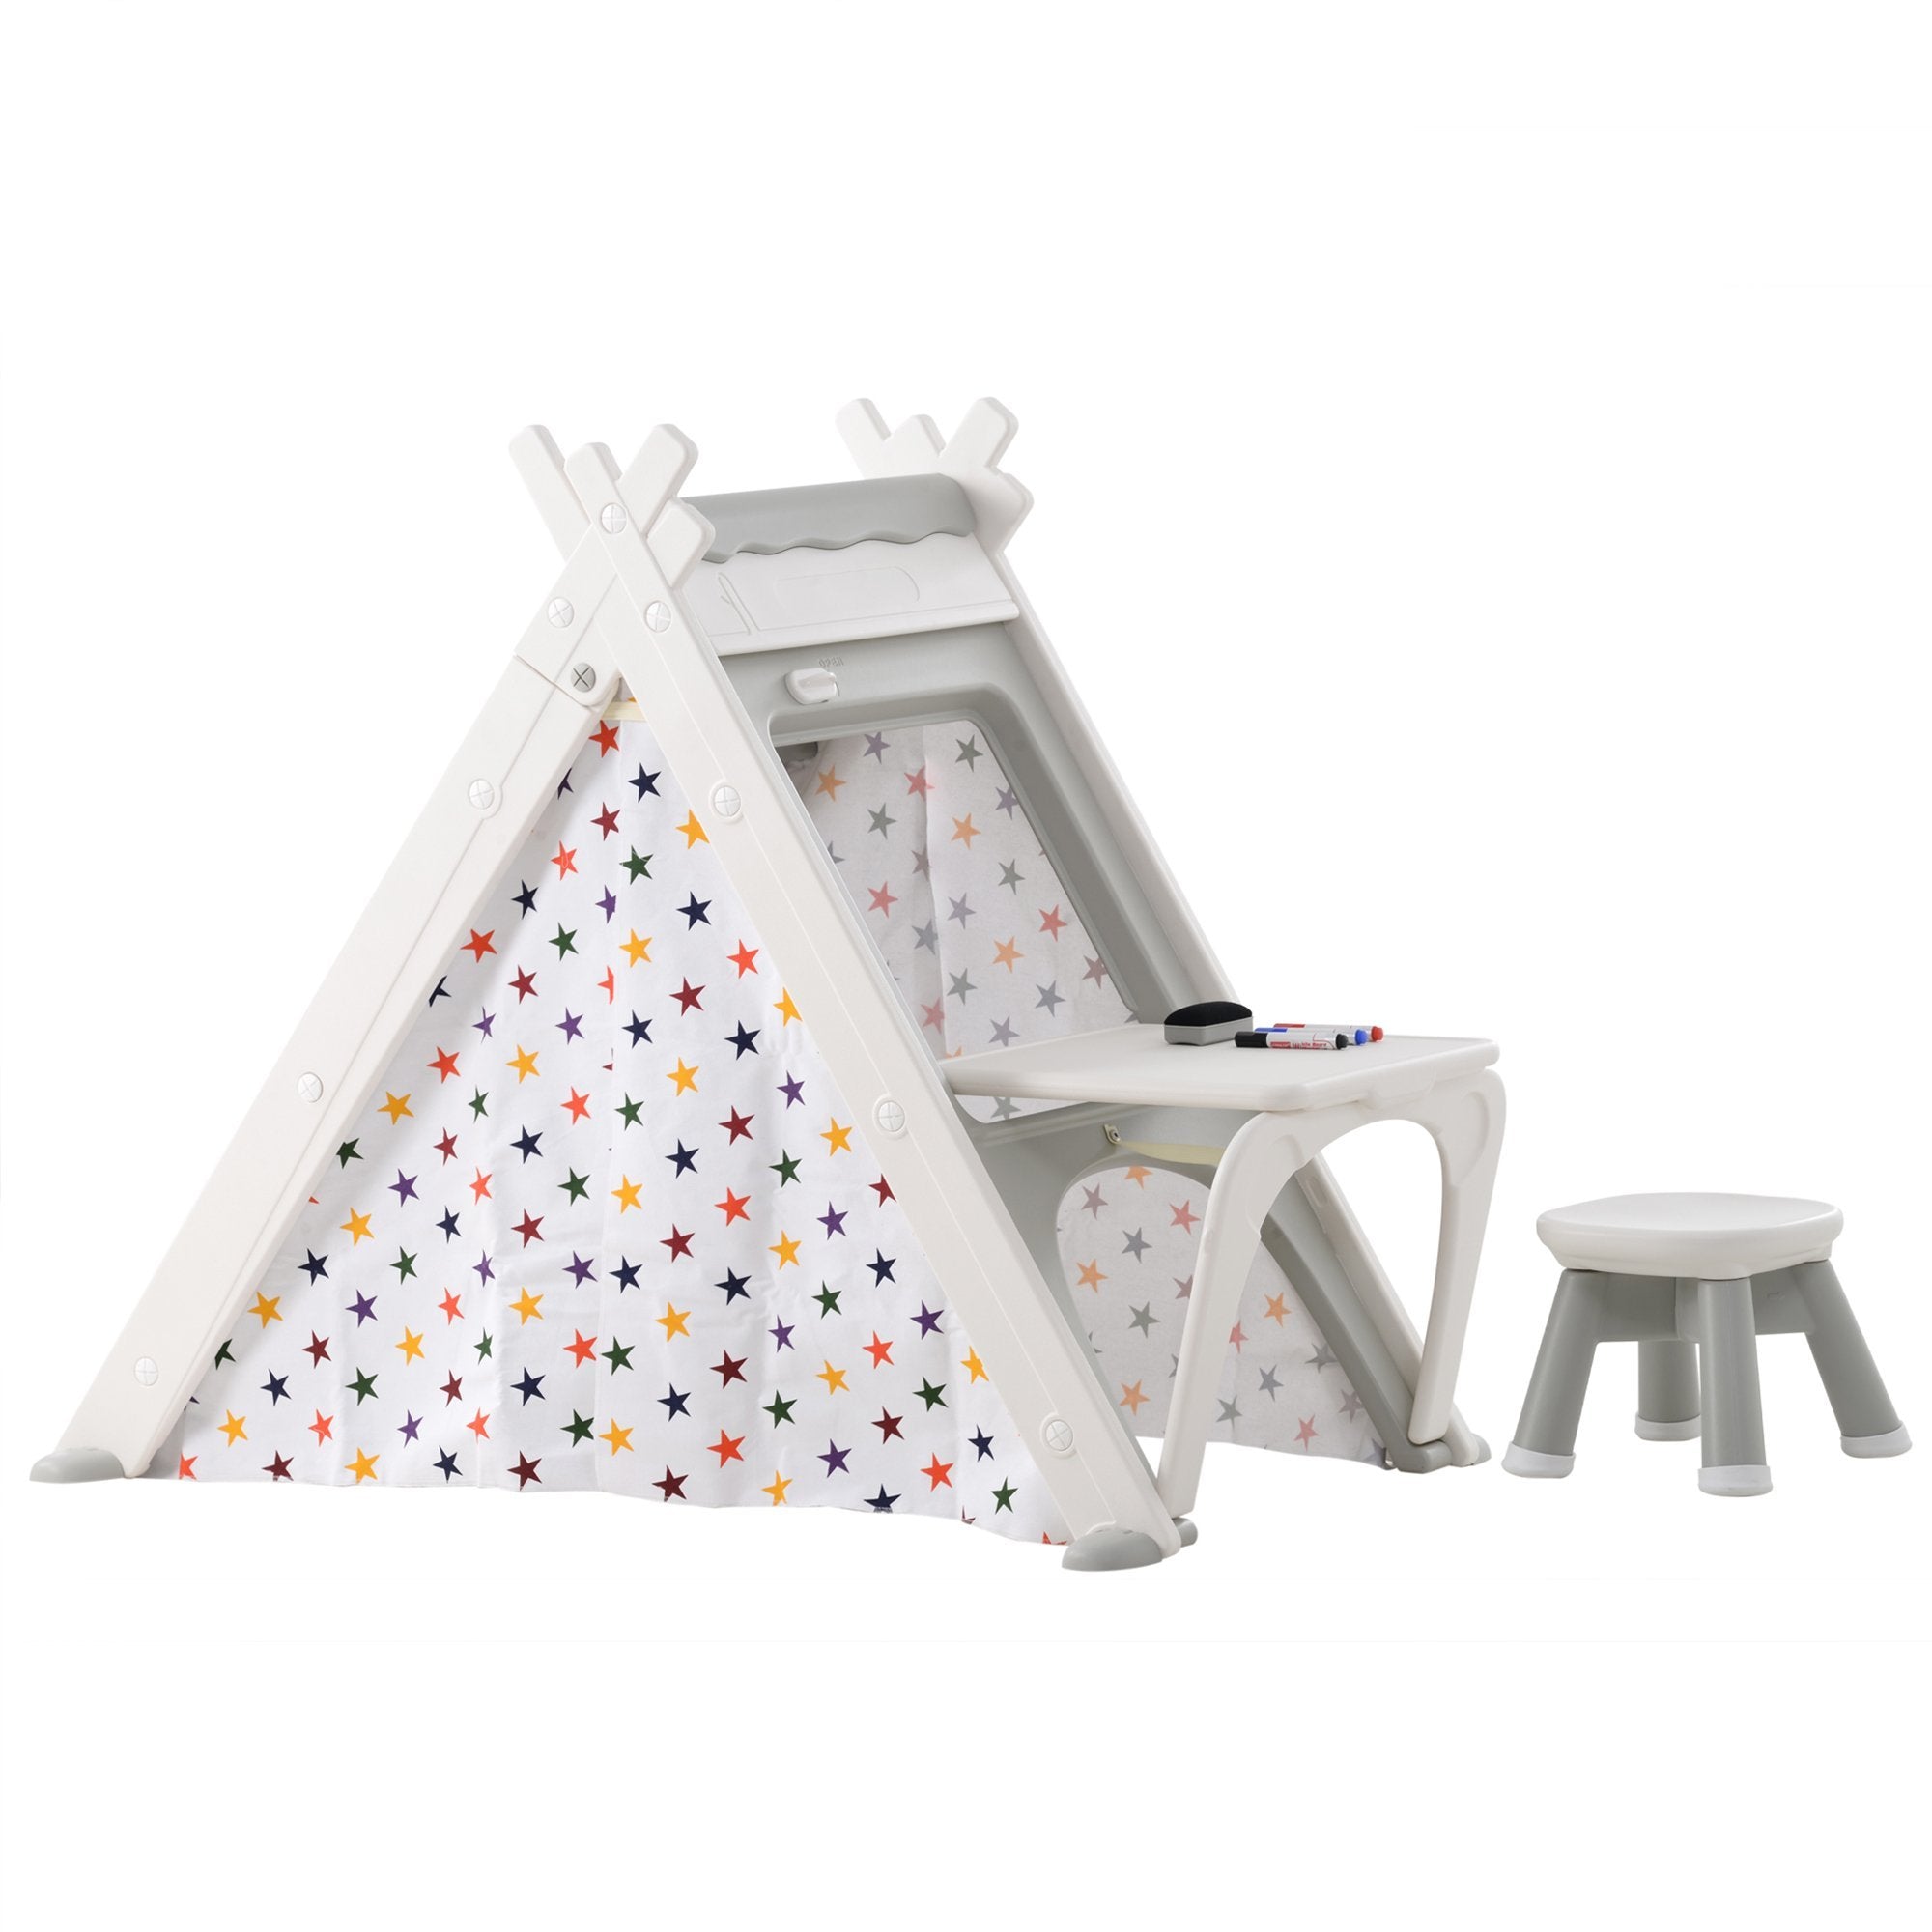 Fold-able Playhouse Tent - 4 in 1 with Stool